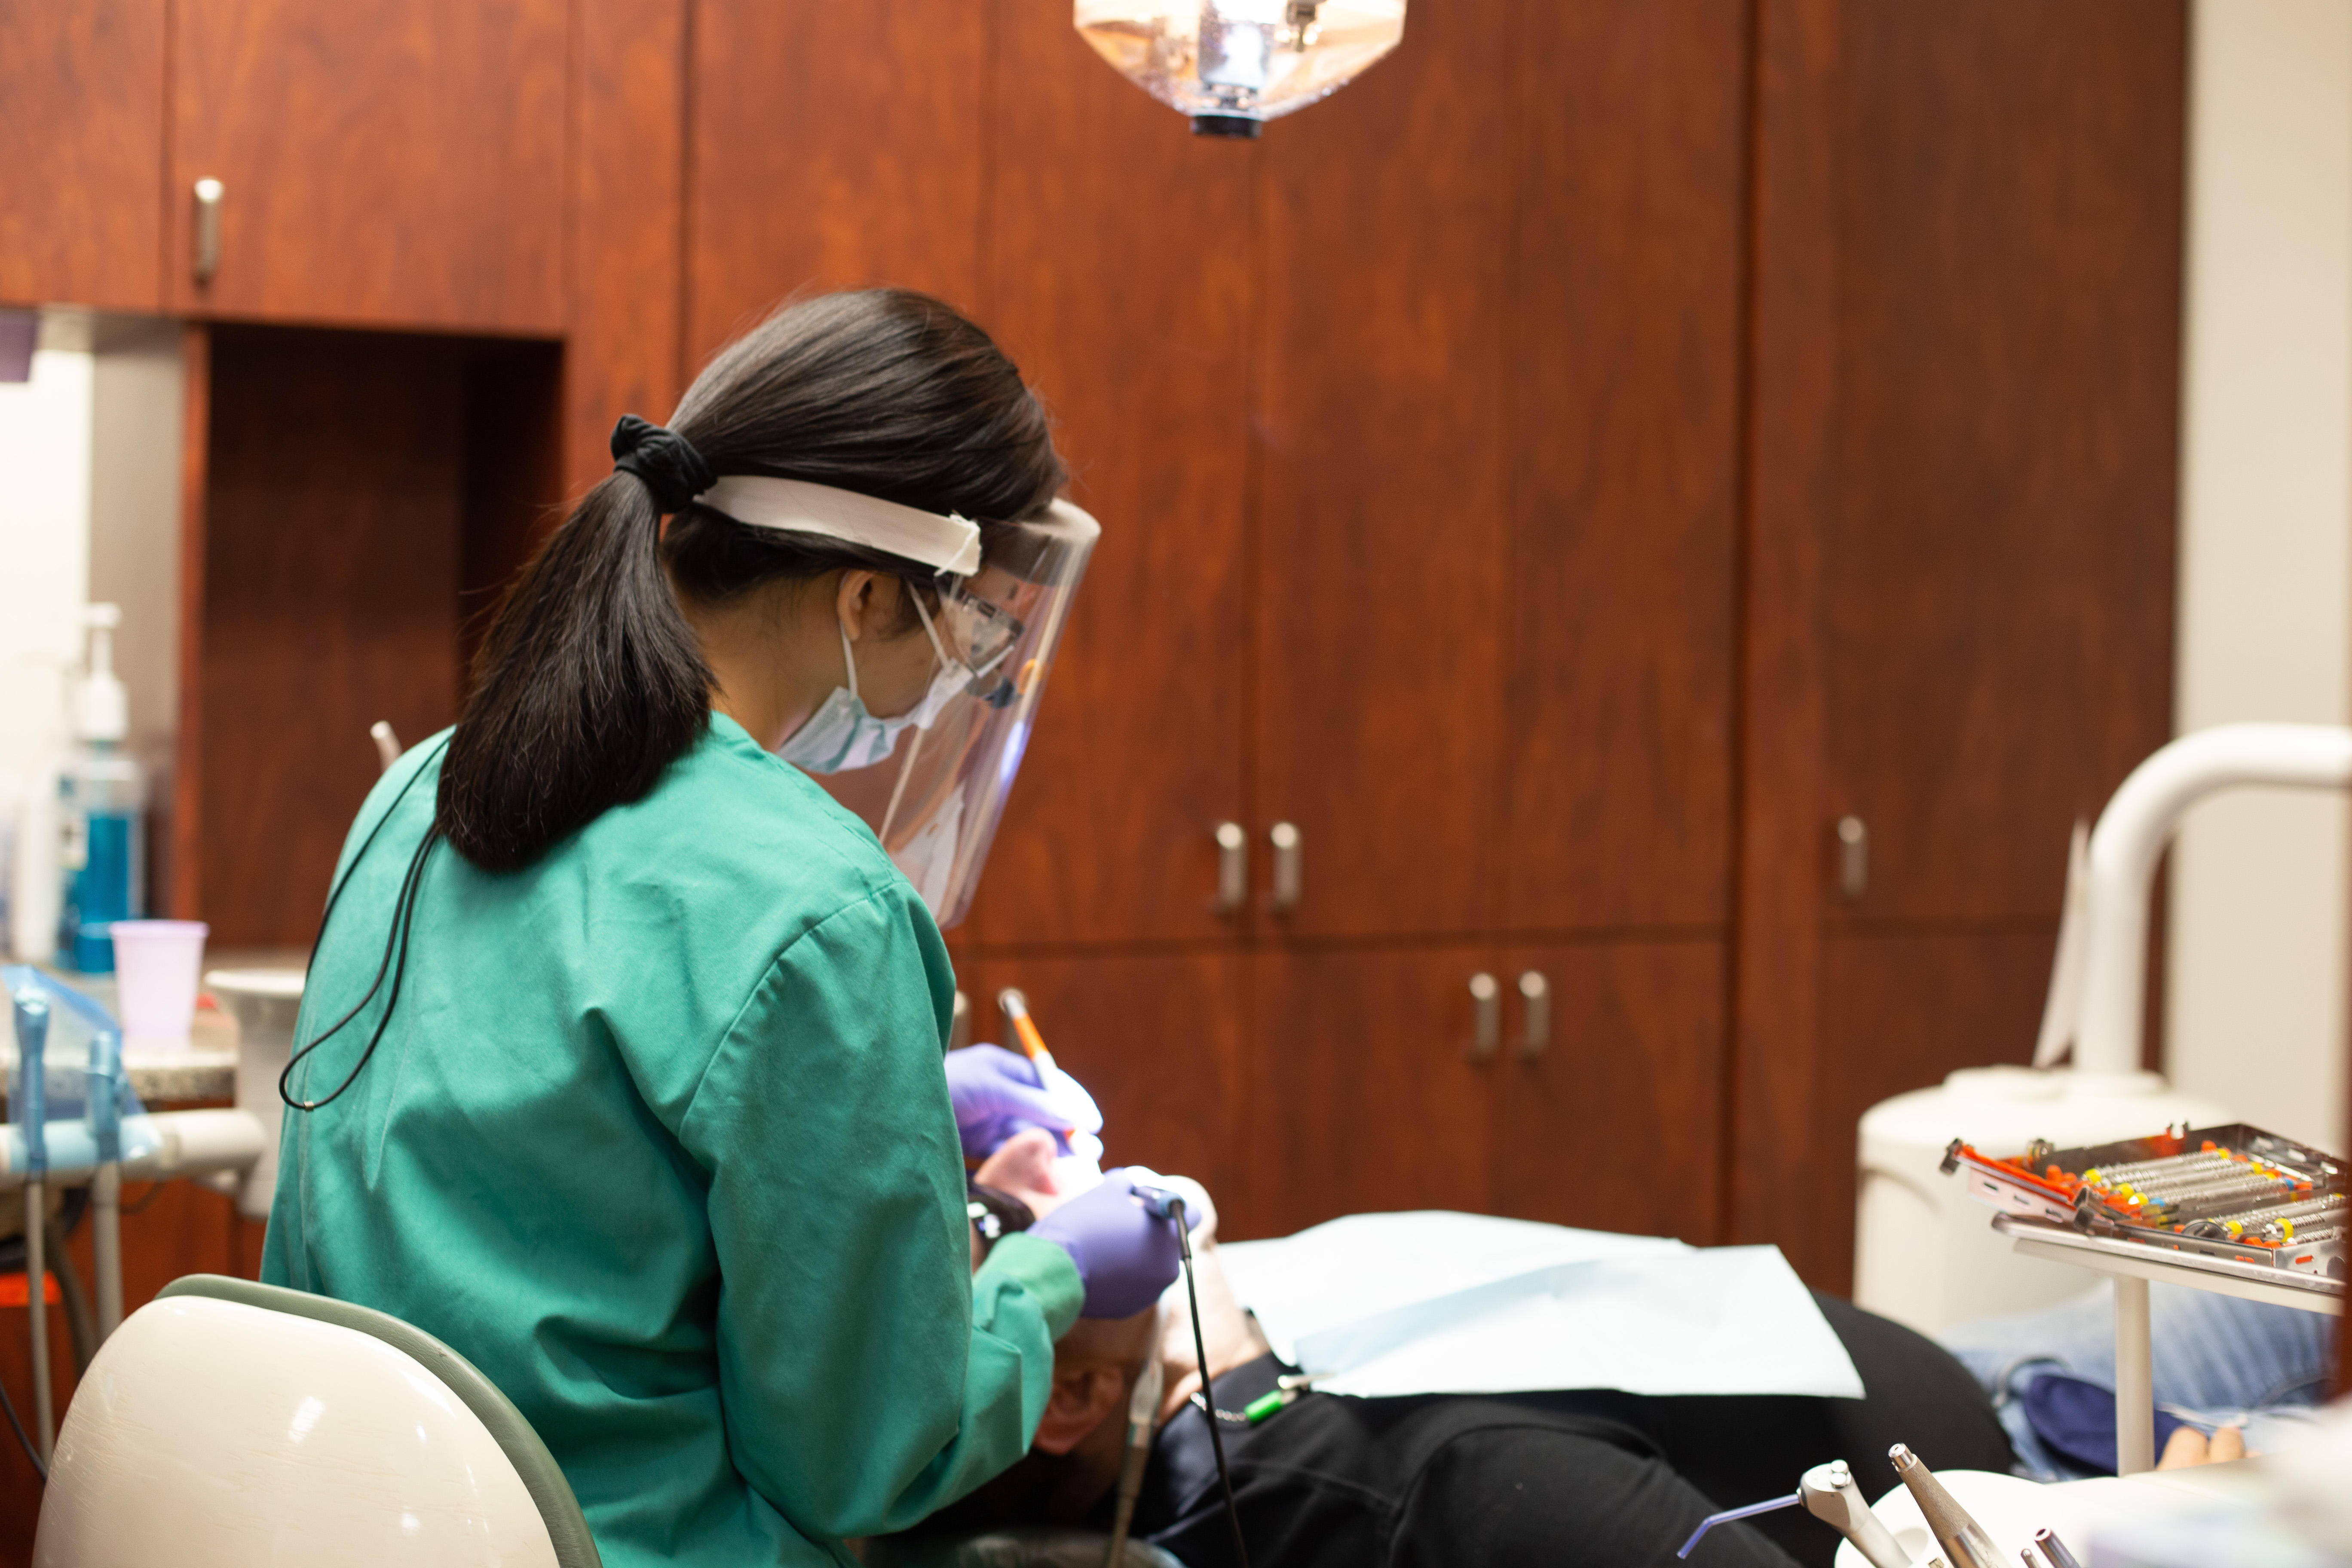 Maintain your healthy smile with regular teeth cleaning appointments.